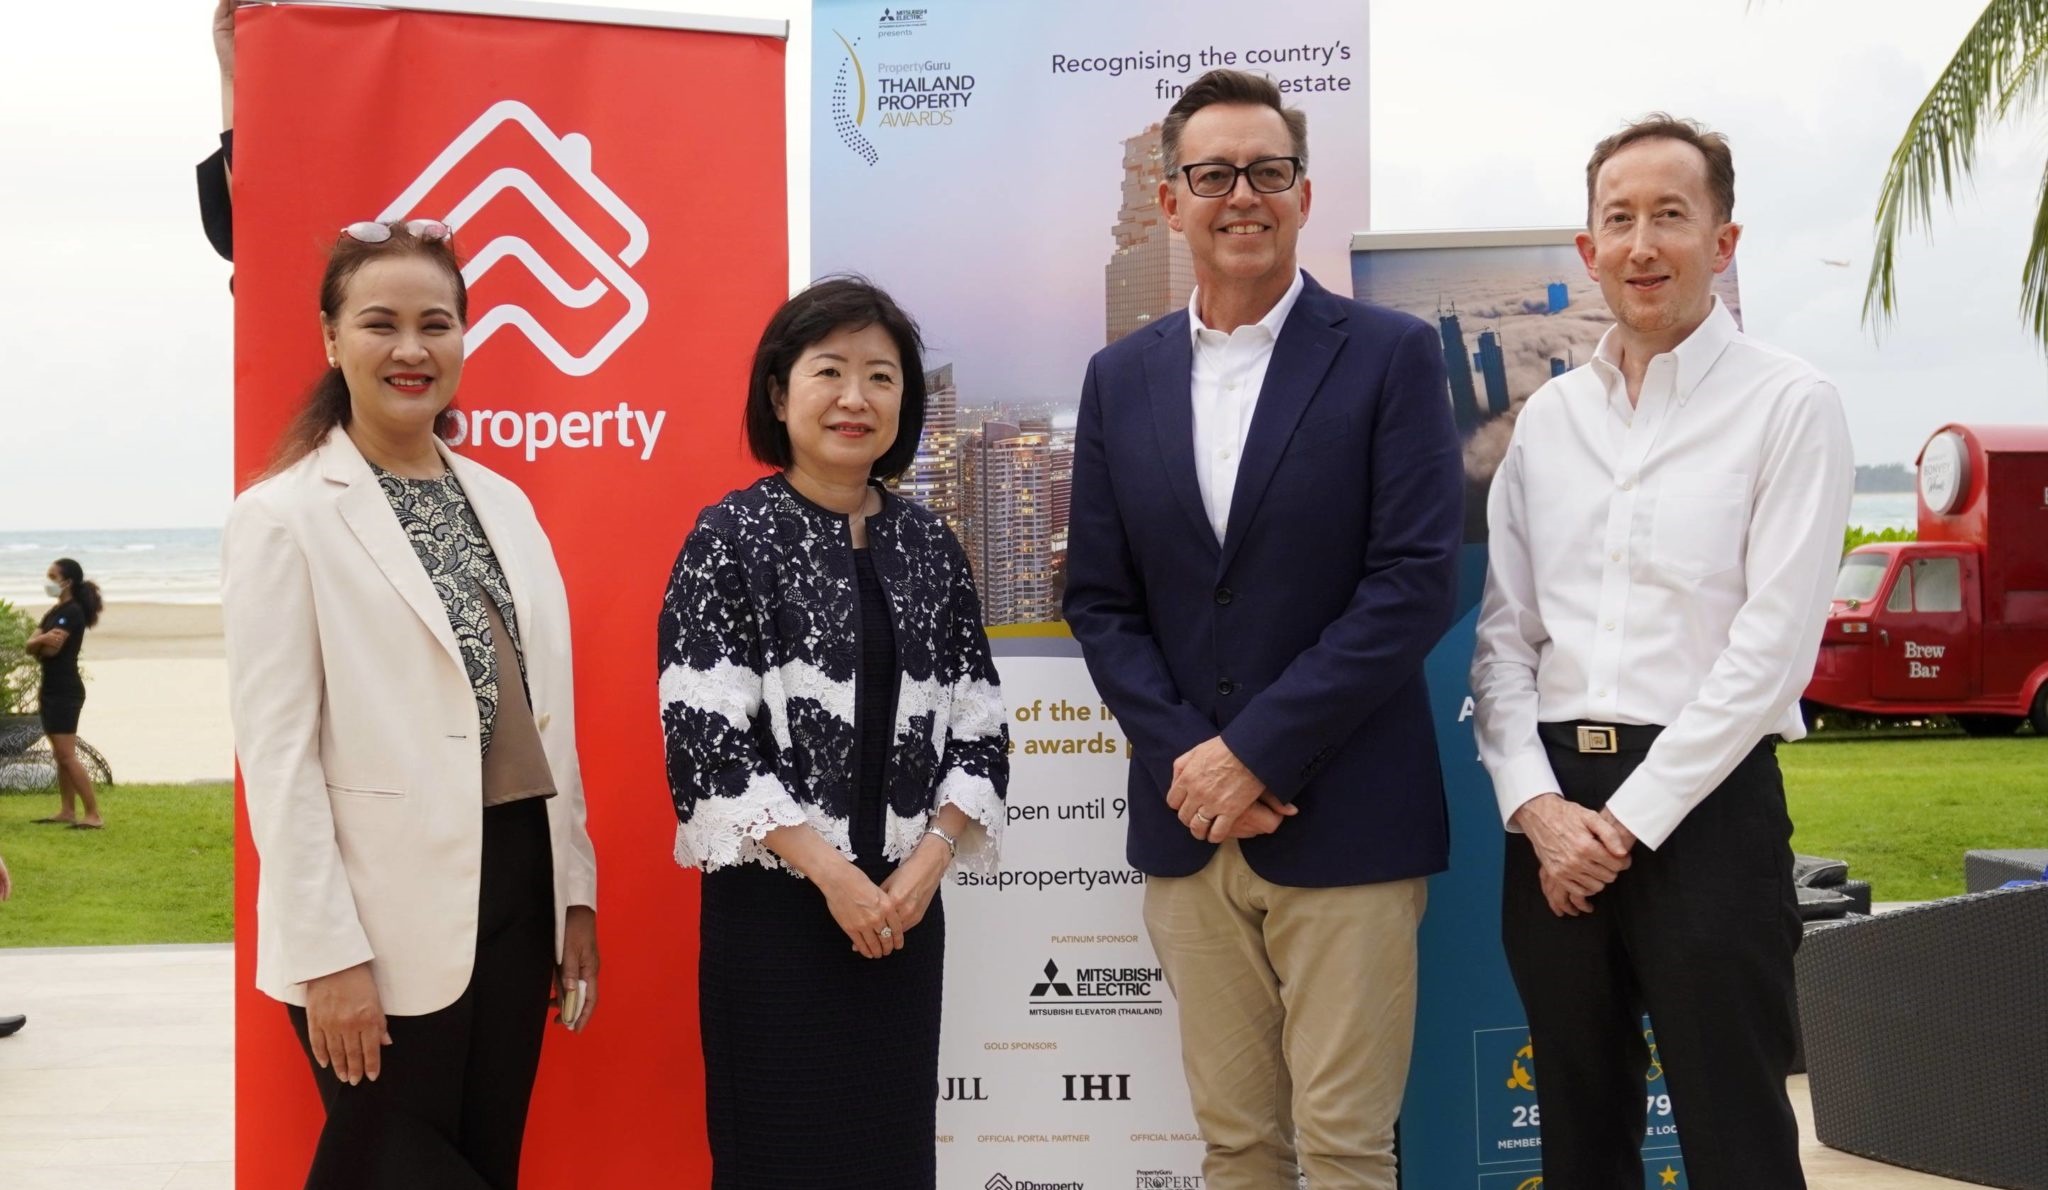 Clink and Connect Event of The 17th PropertyGuru Awards